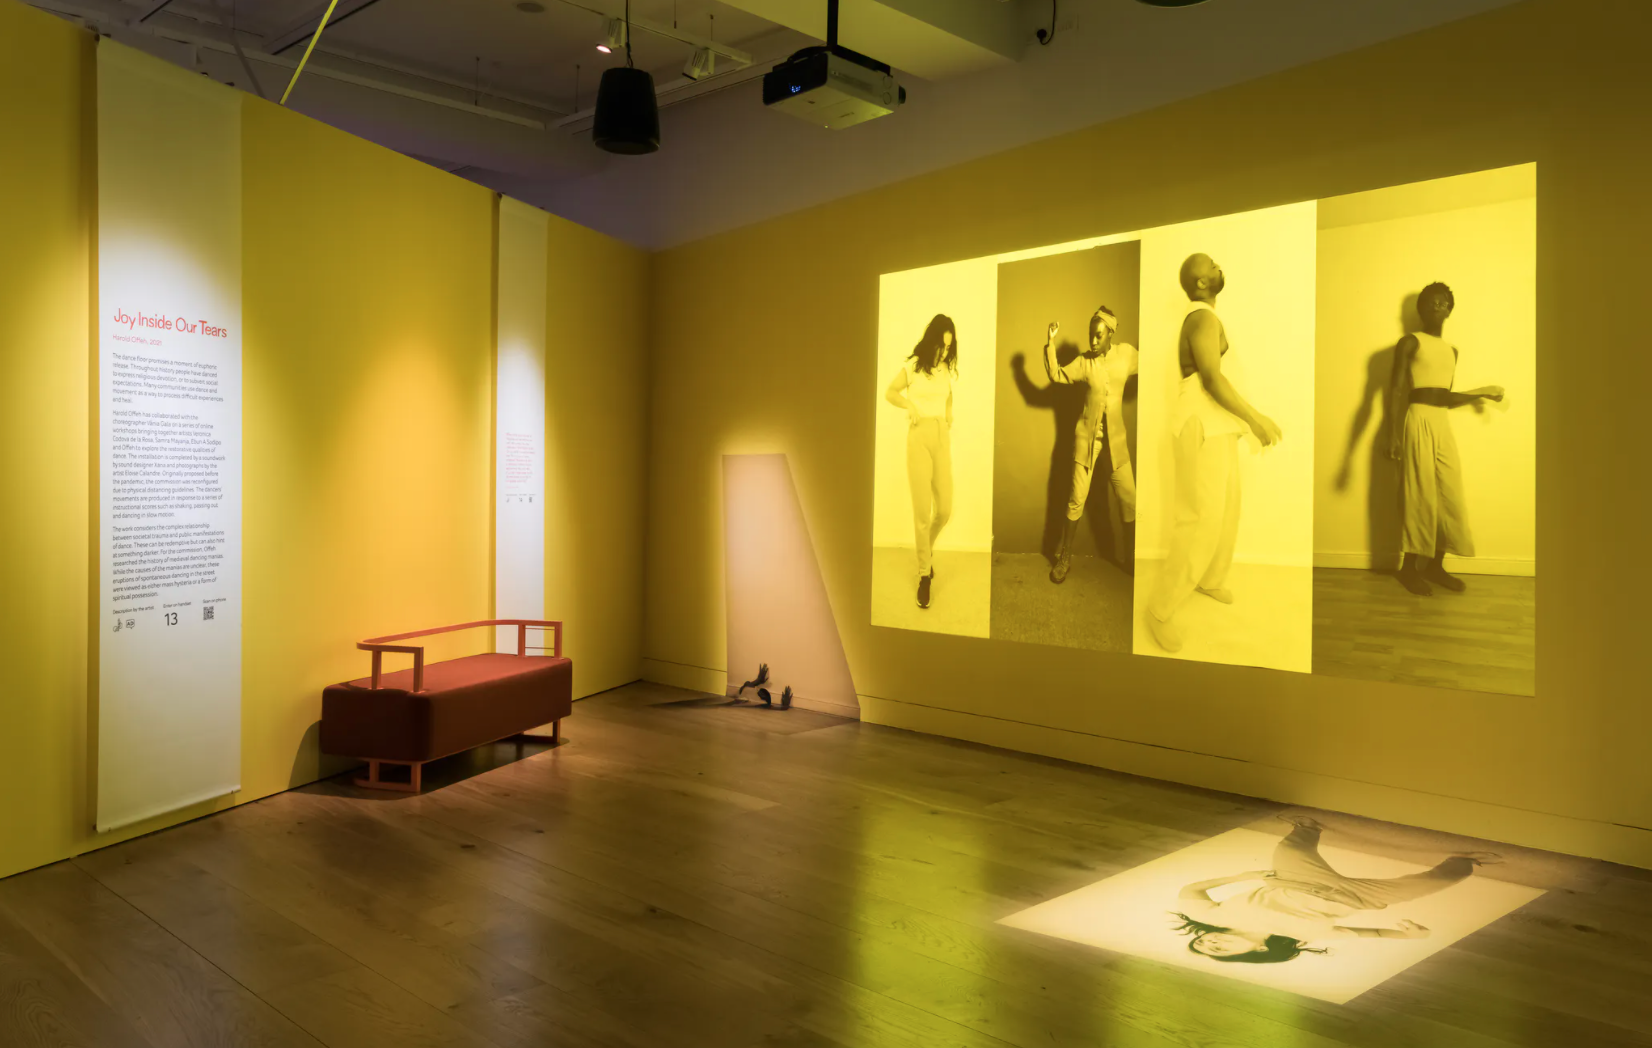 Exhibition space with yellow projection on walls